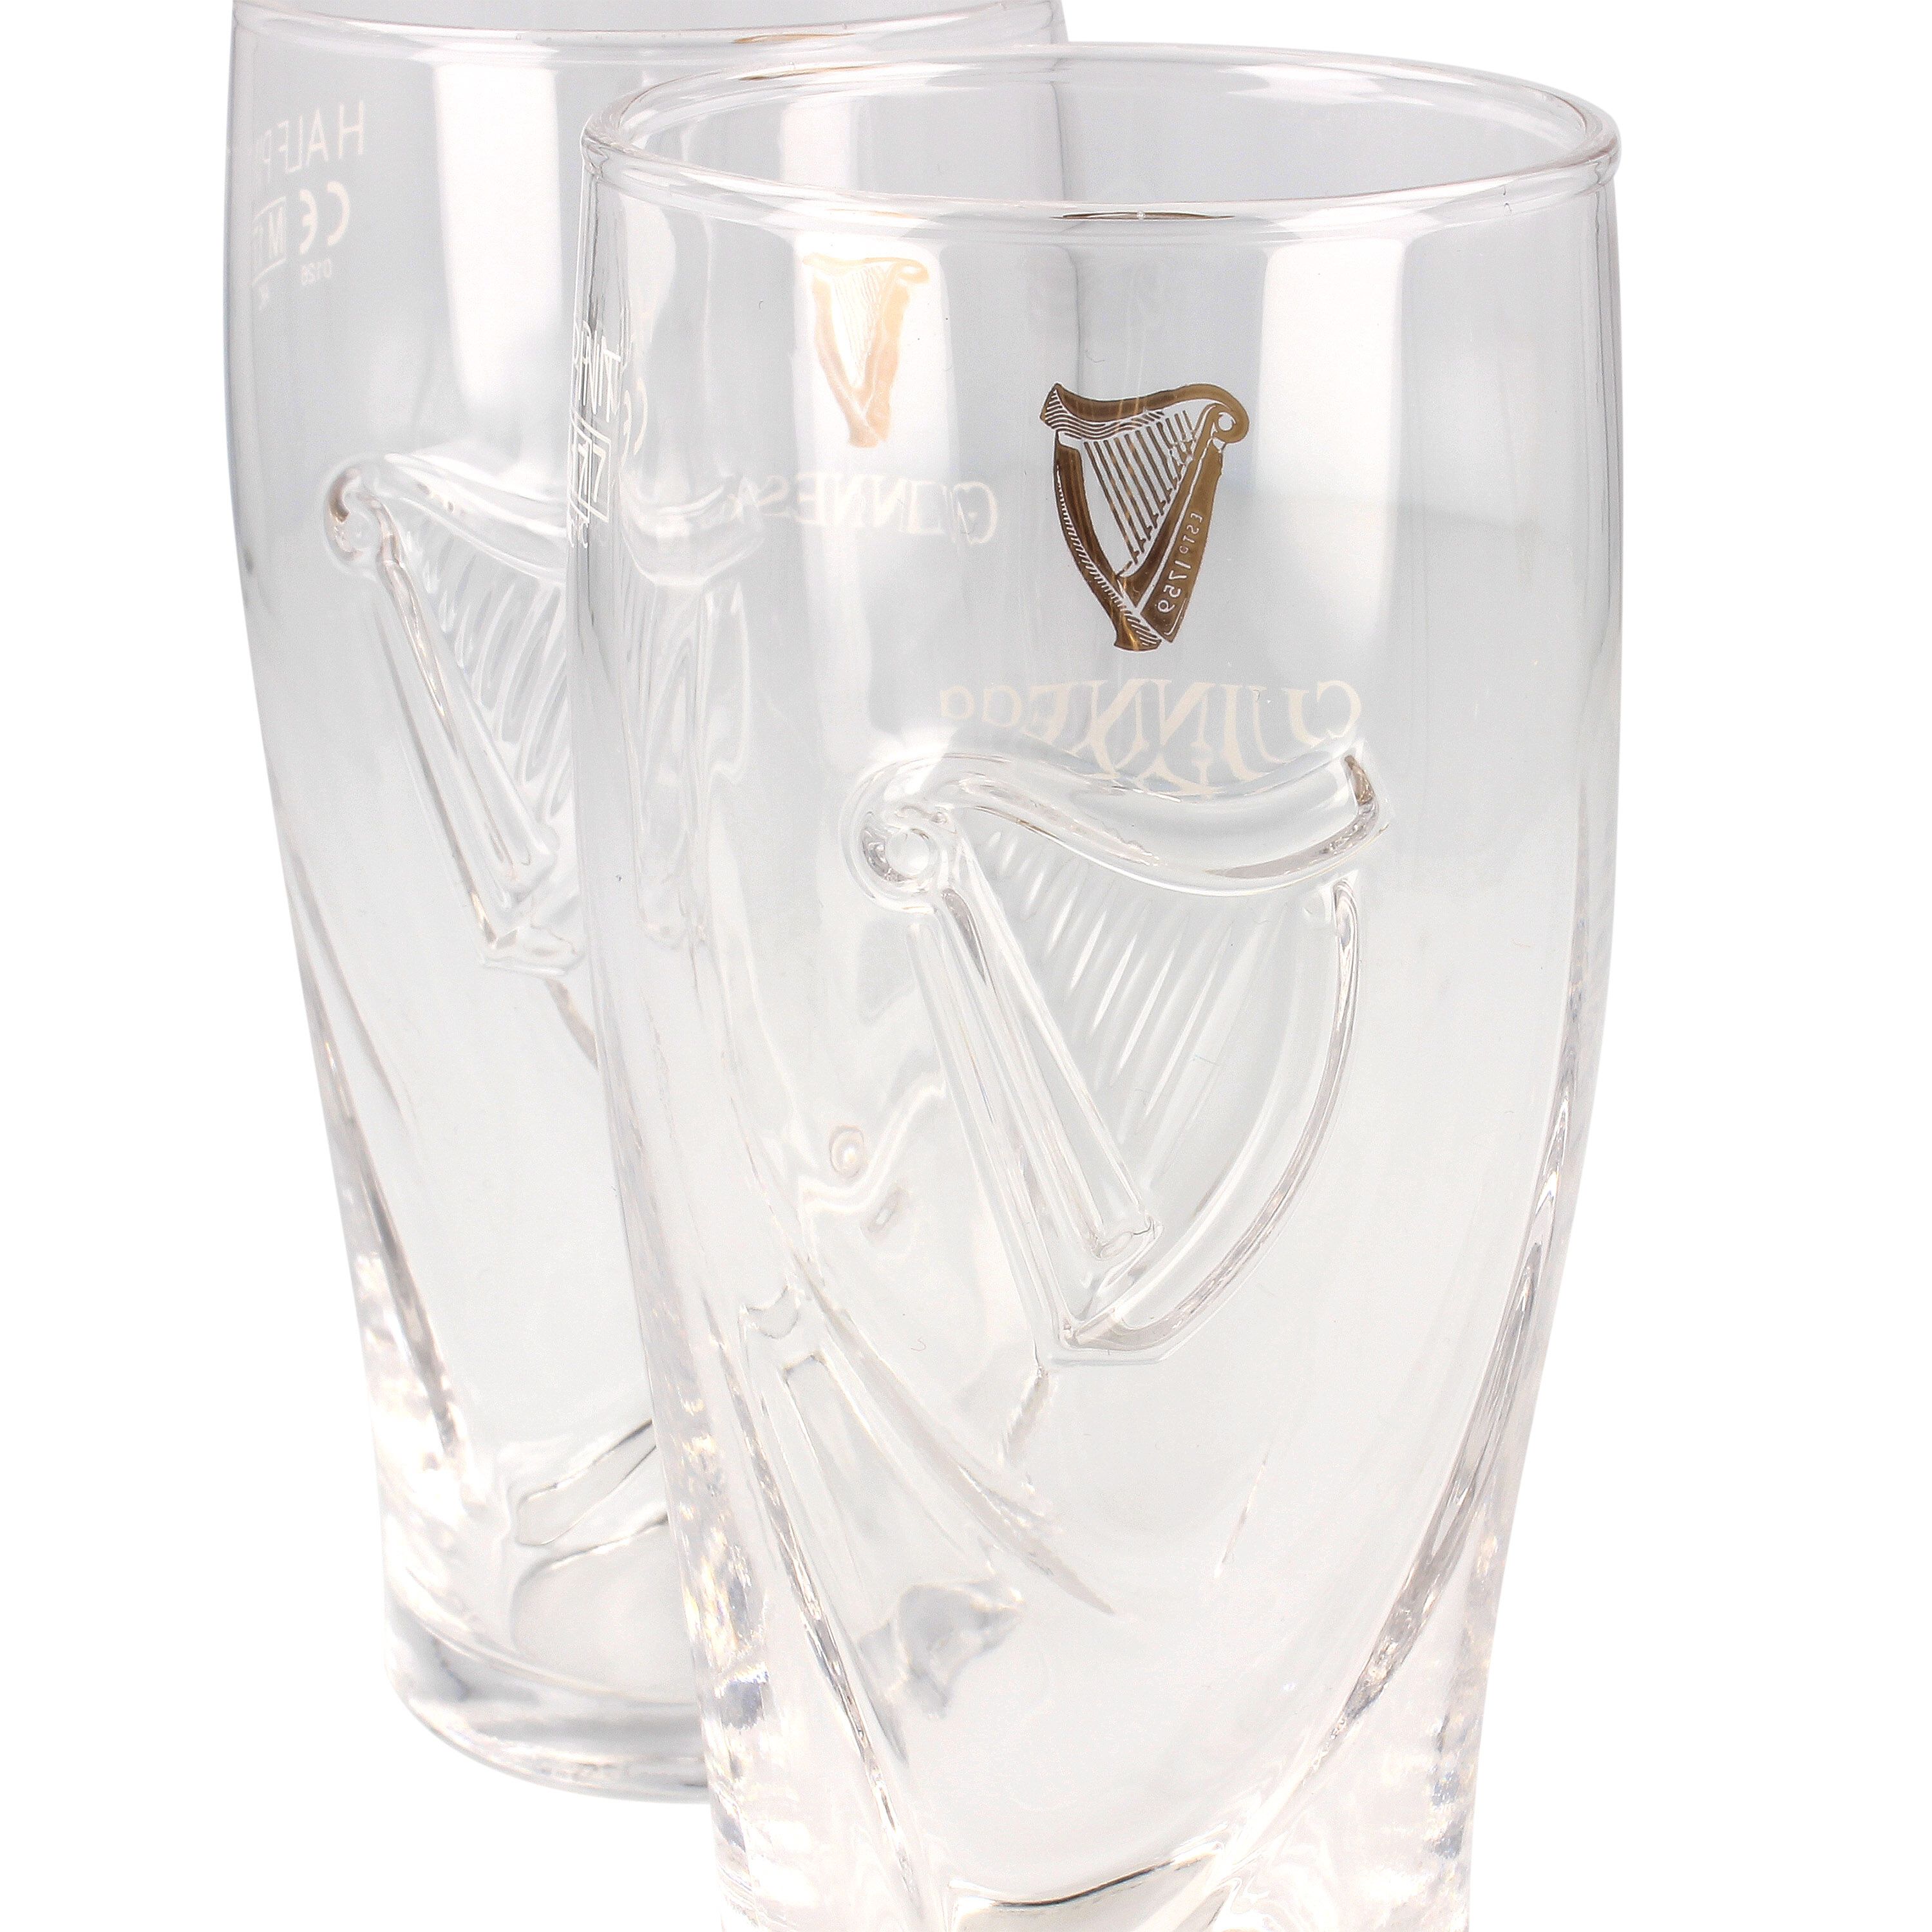 Each Details about   Guinness Embossed Harp Half Pint Beer Glass 